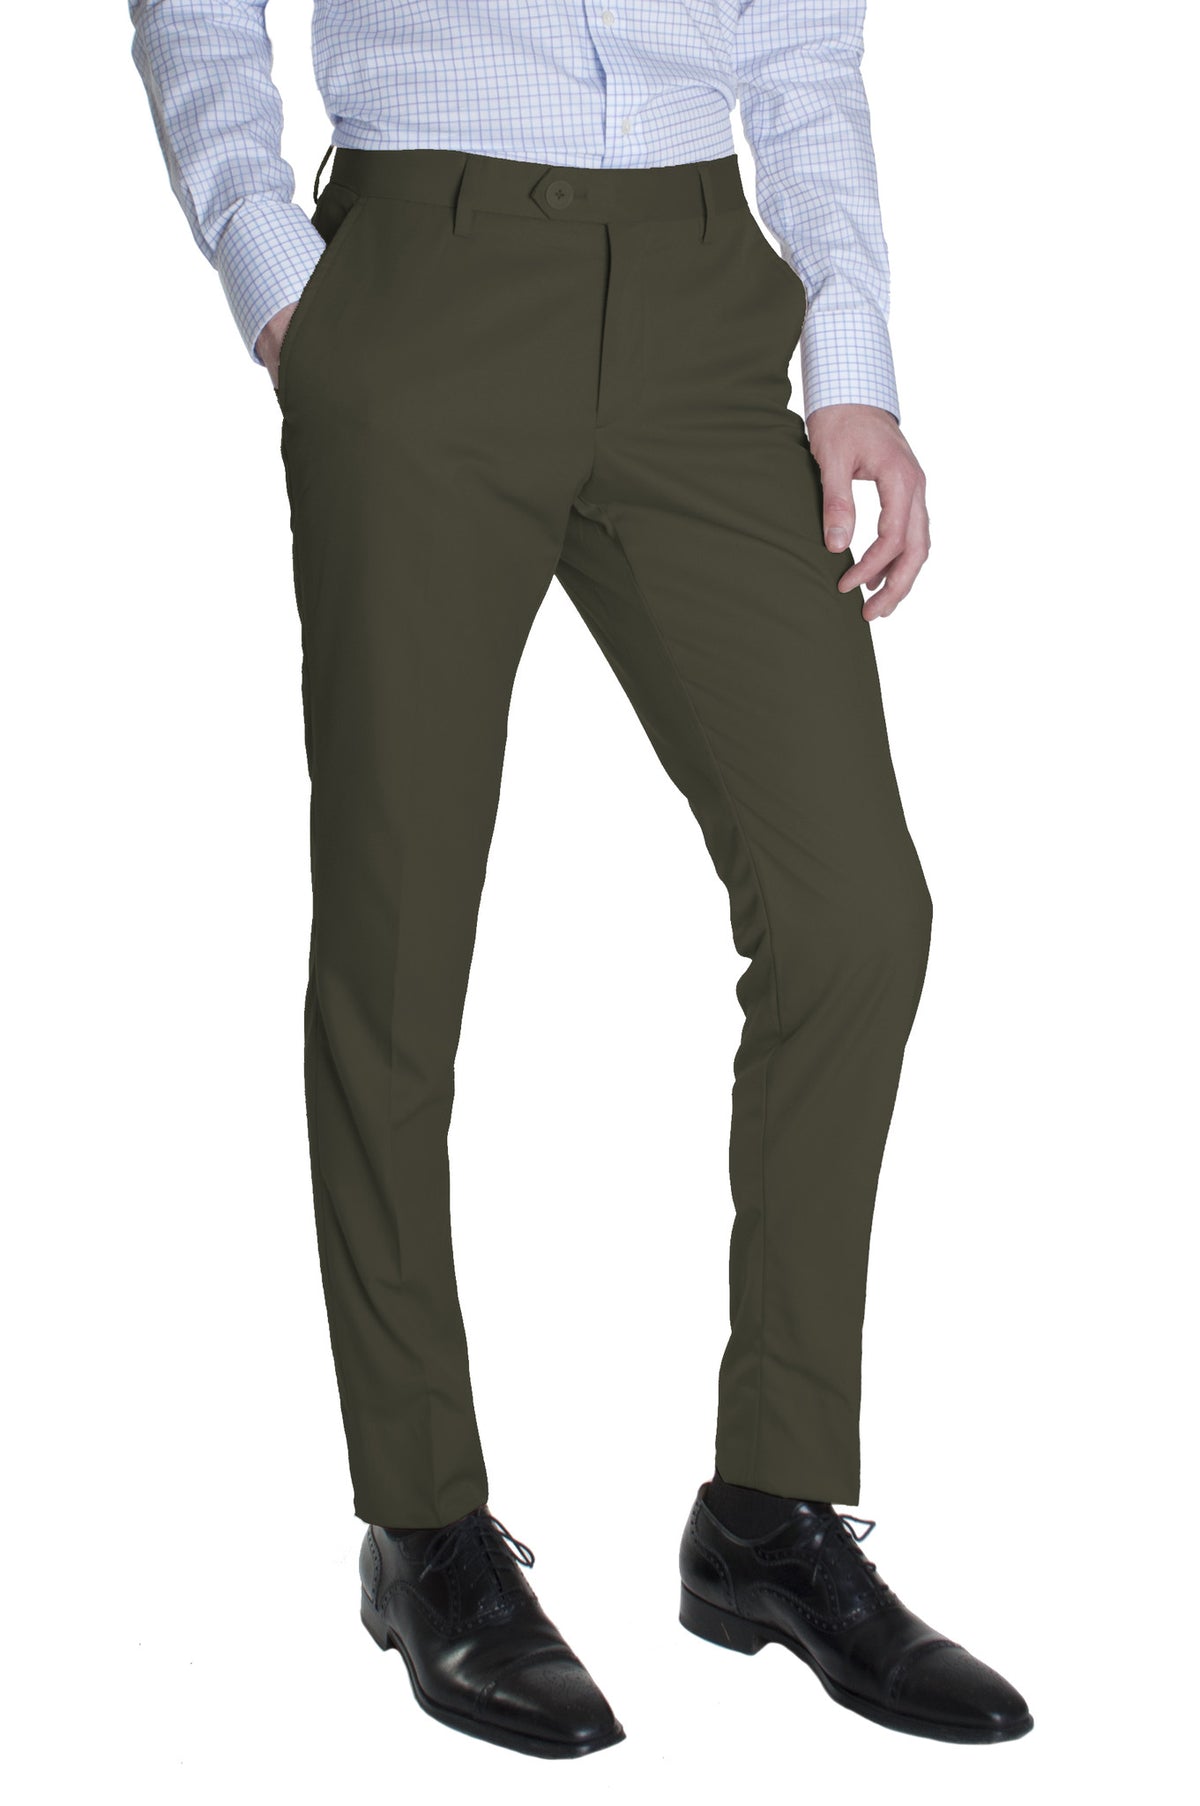 Buy Olive Green Color Ankle Length Fusion Cotton Pant Online | Tistabene -  Tistabene